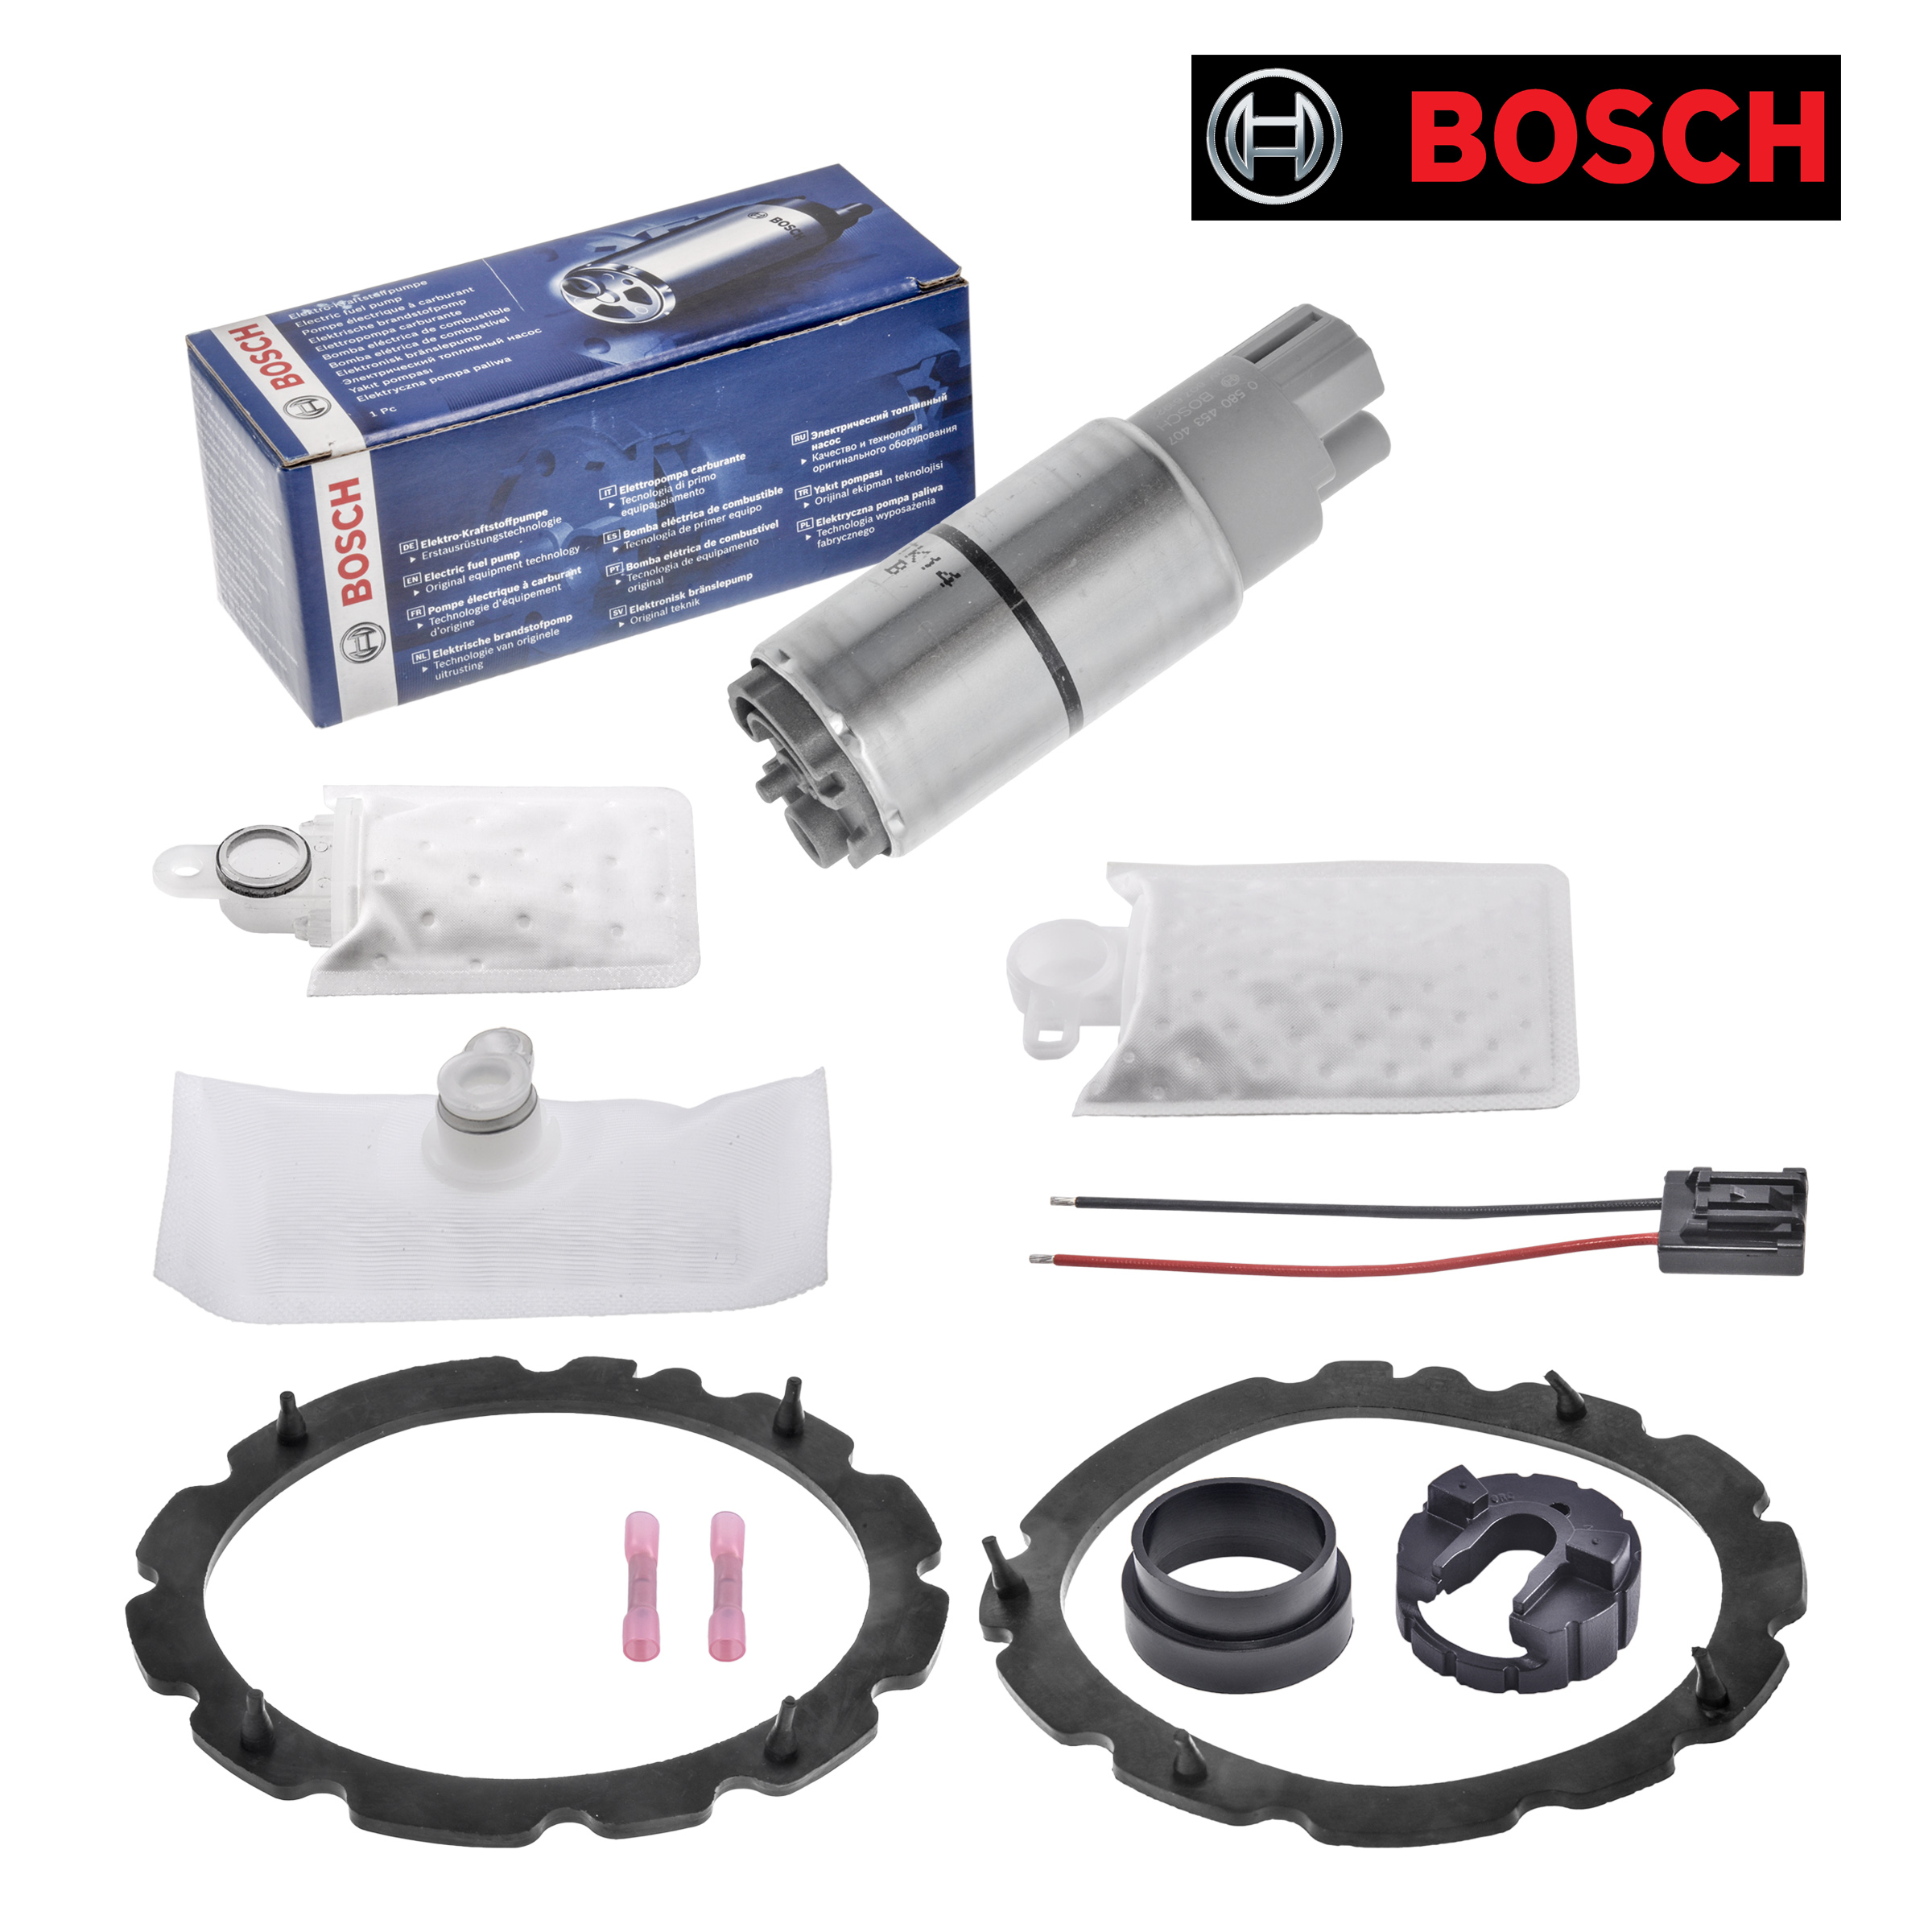 New Bosch Fuel Pump and Strainer K9261 For Ford Lincoln 98-04